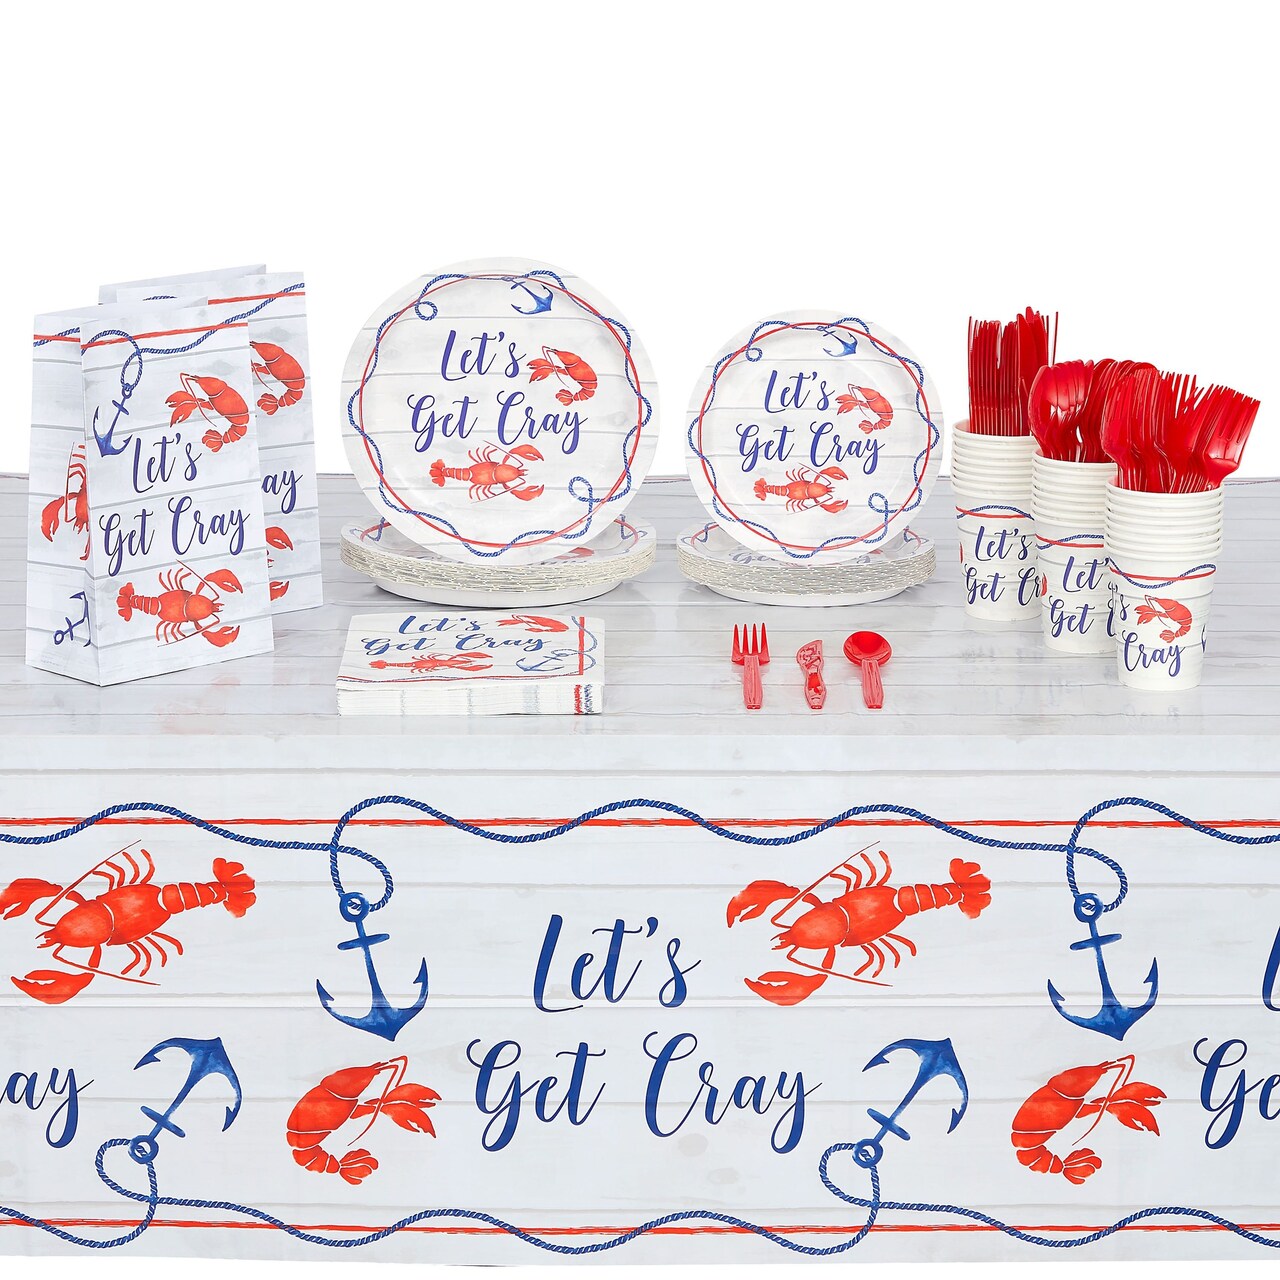 183 Piece Crawfish Boil Party Supplies Set for 24 Guests, Plates, Napkins,  Cutlery, Cups, Treat Bags, Tablecloths, Banner